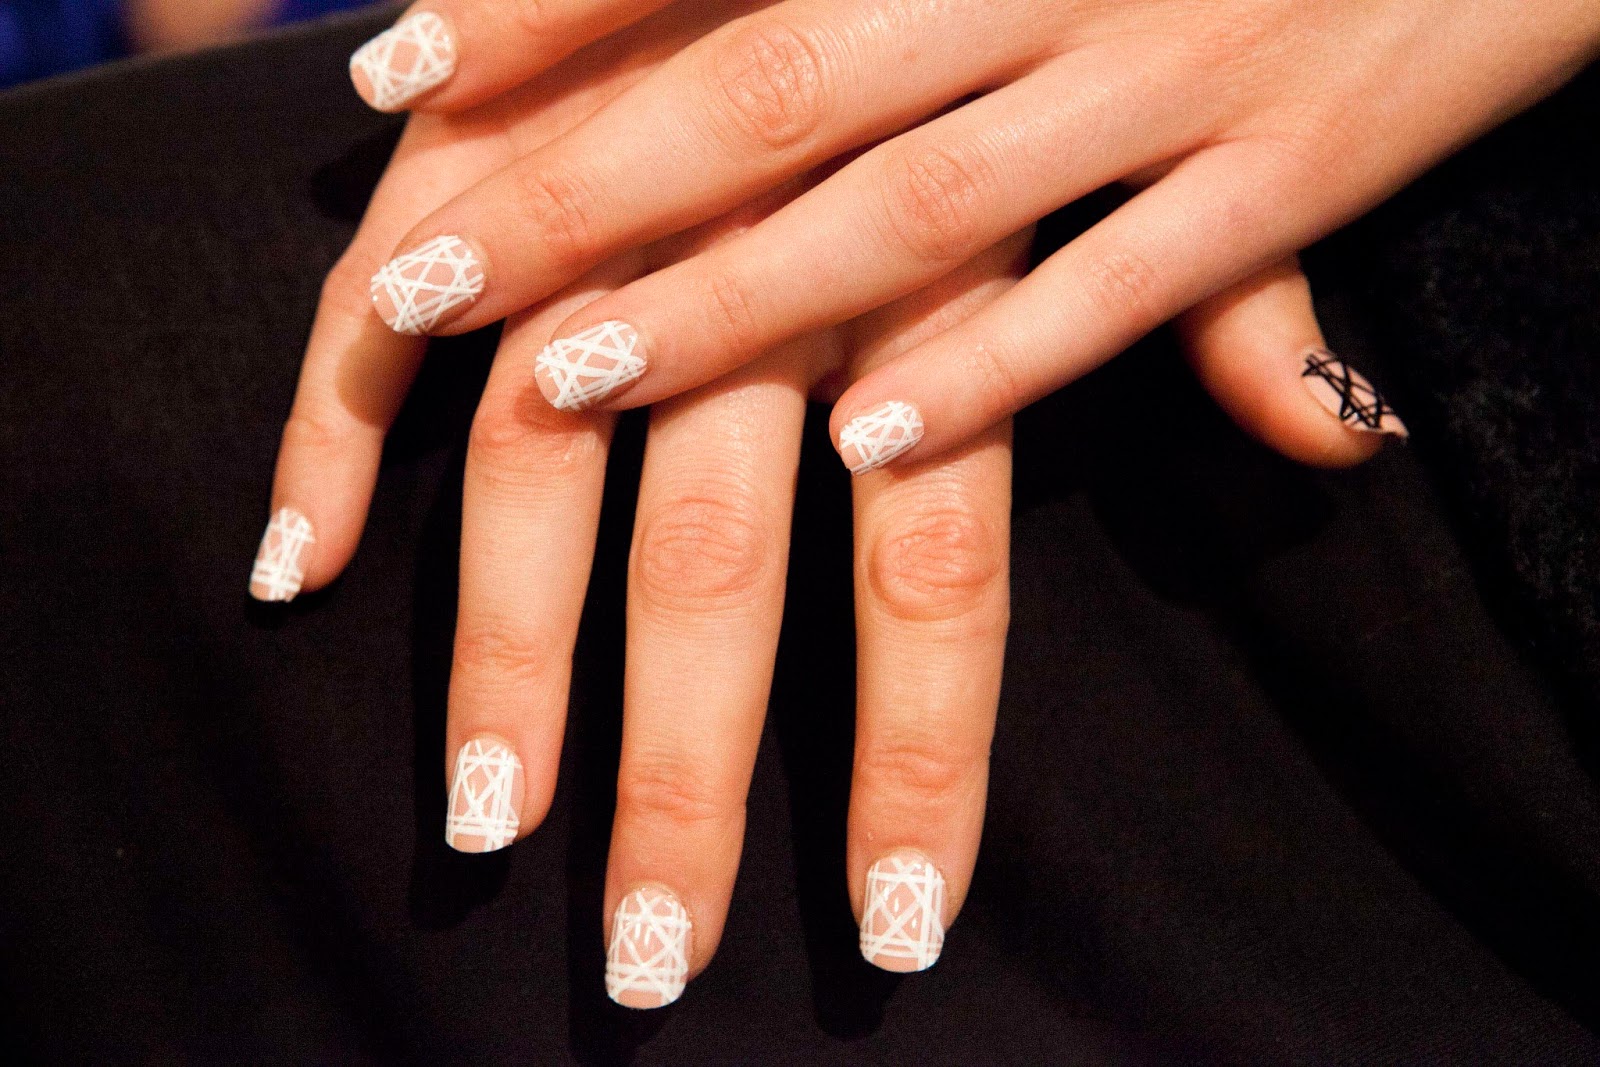 Nyfw S S 2015 Nails Press On Manis Skin Jewelry Tattoos Trends